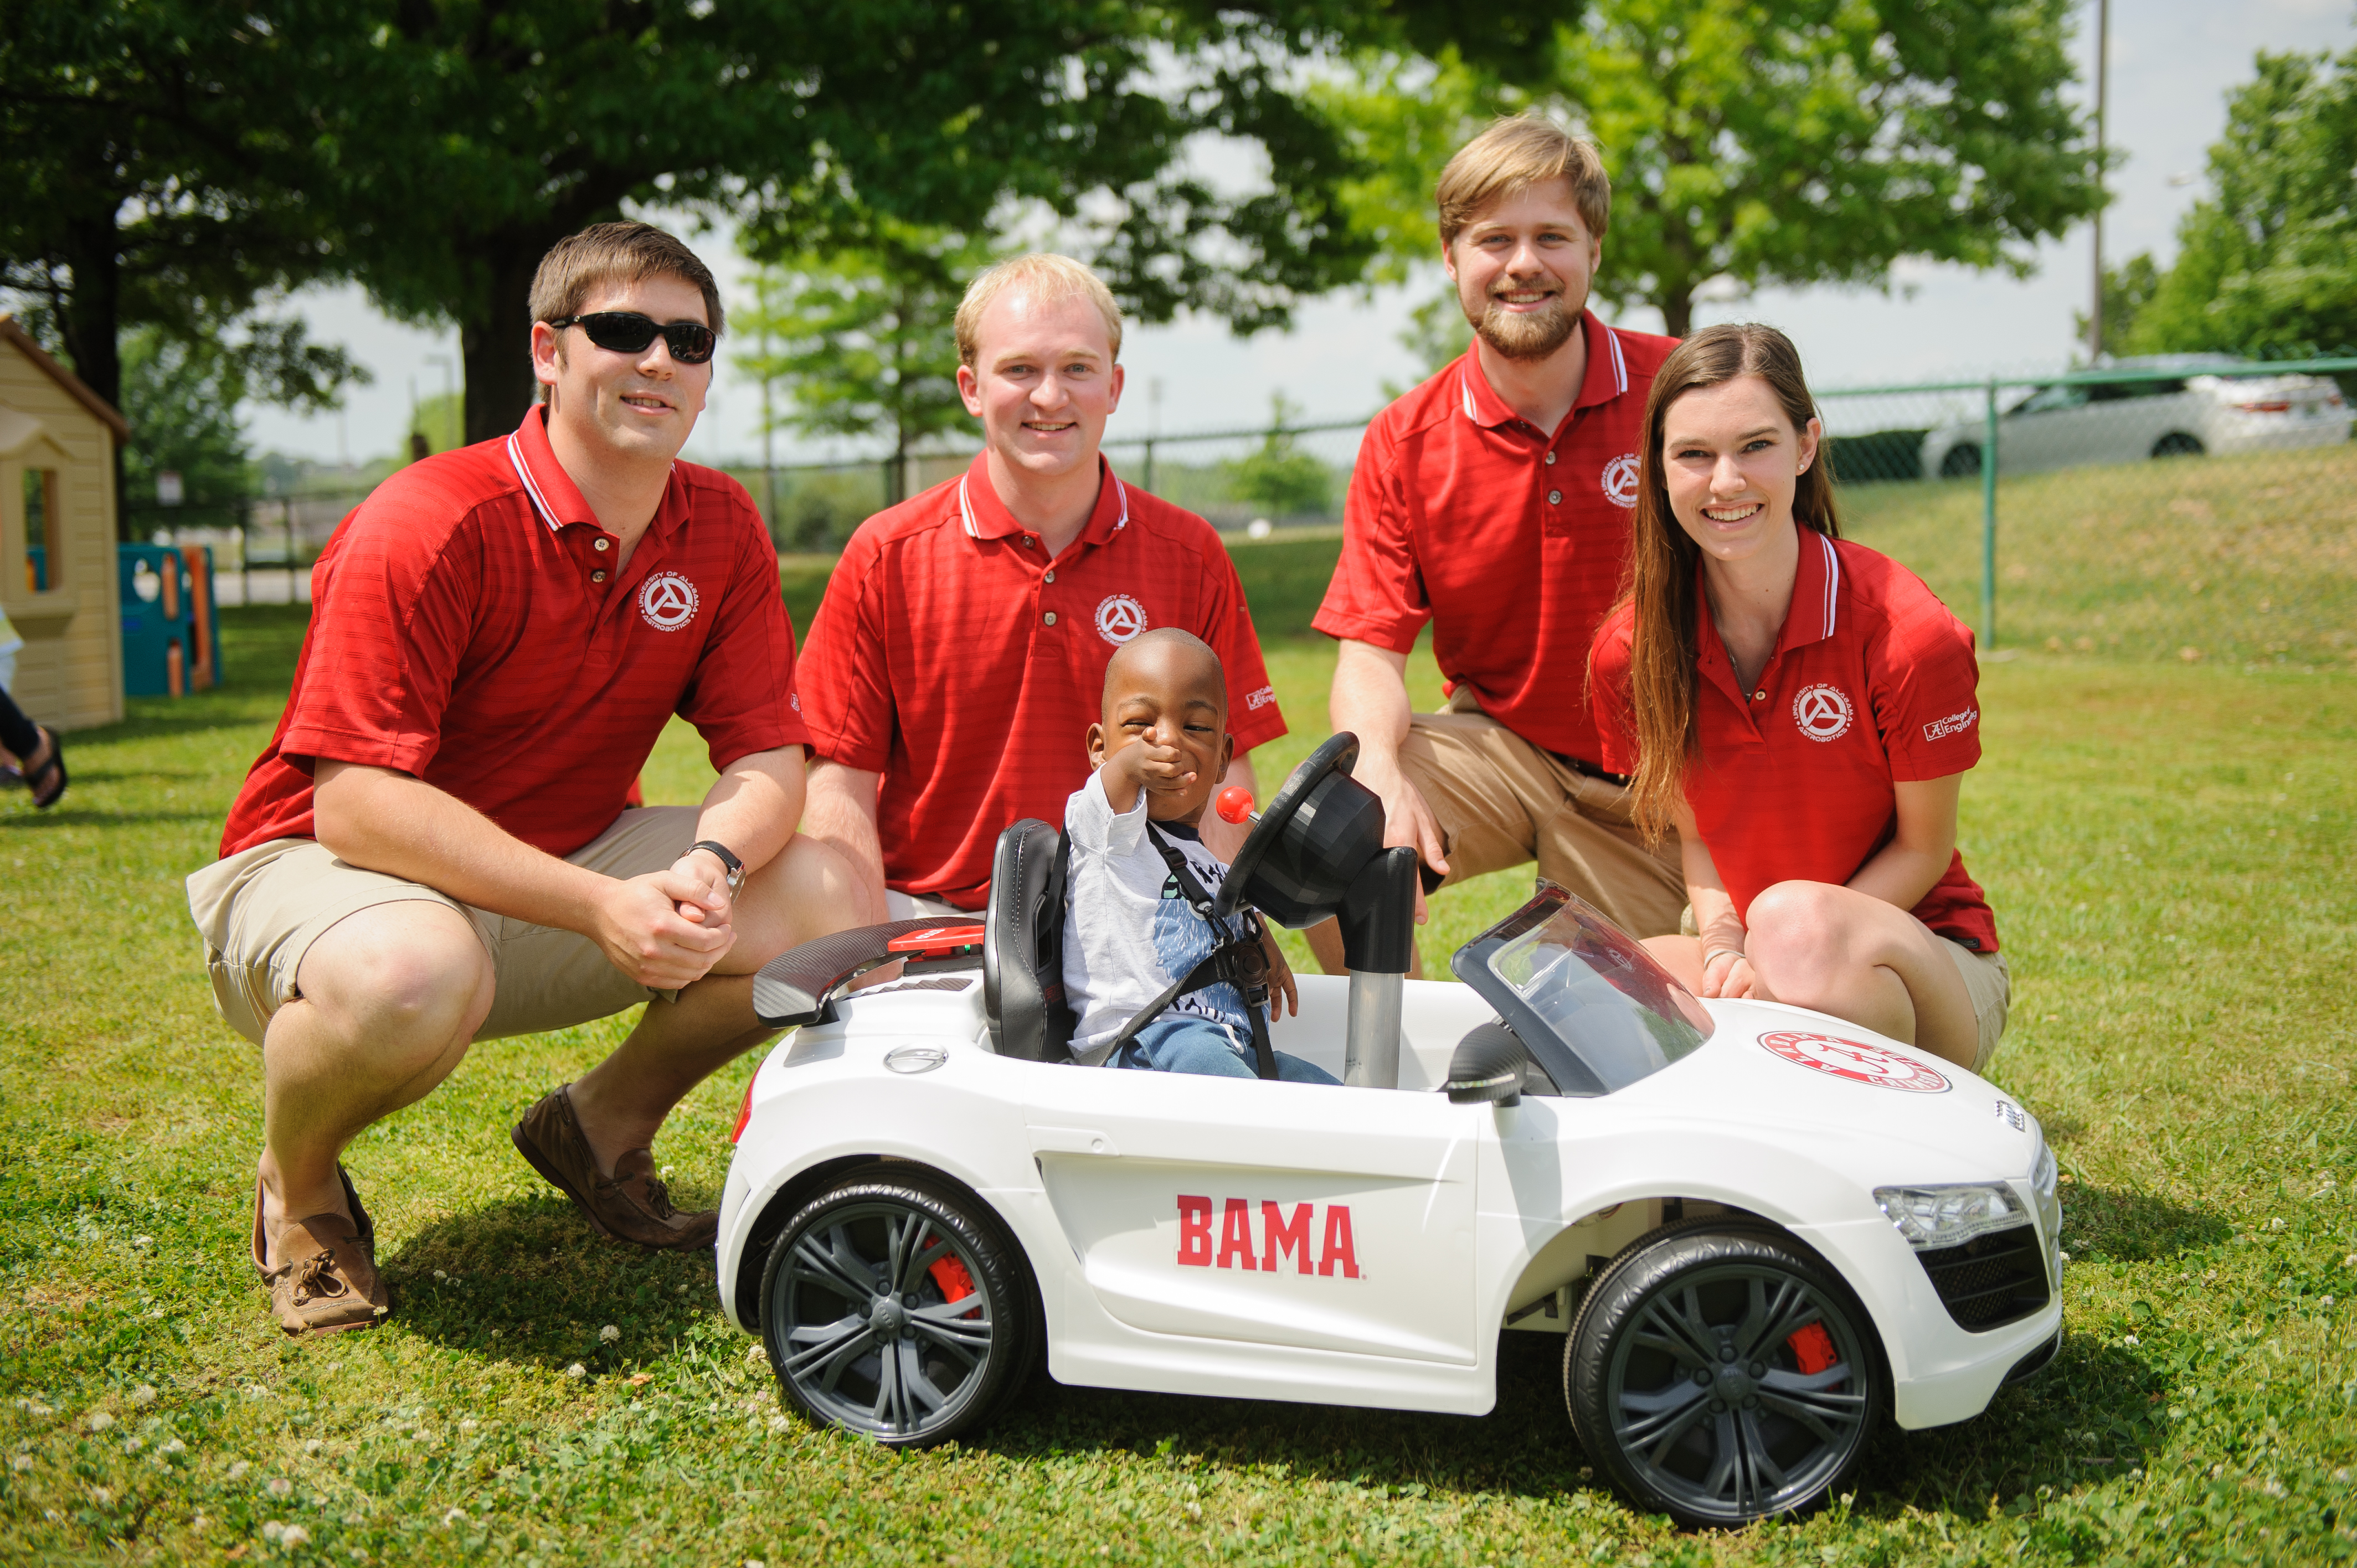 UA Engineering Students Use Skills To Help Child With Special Needs